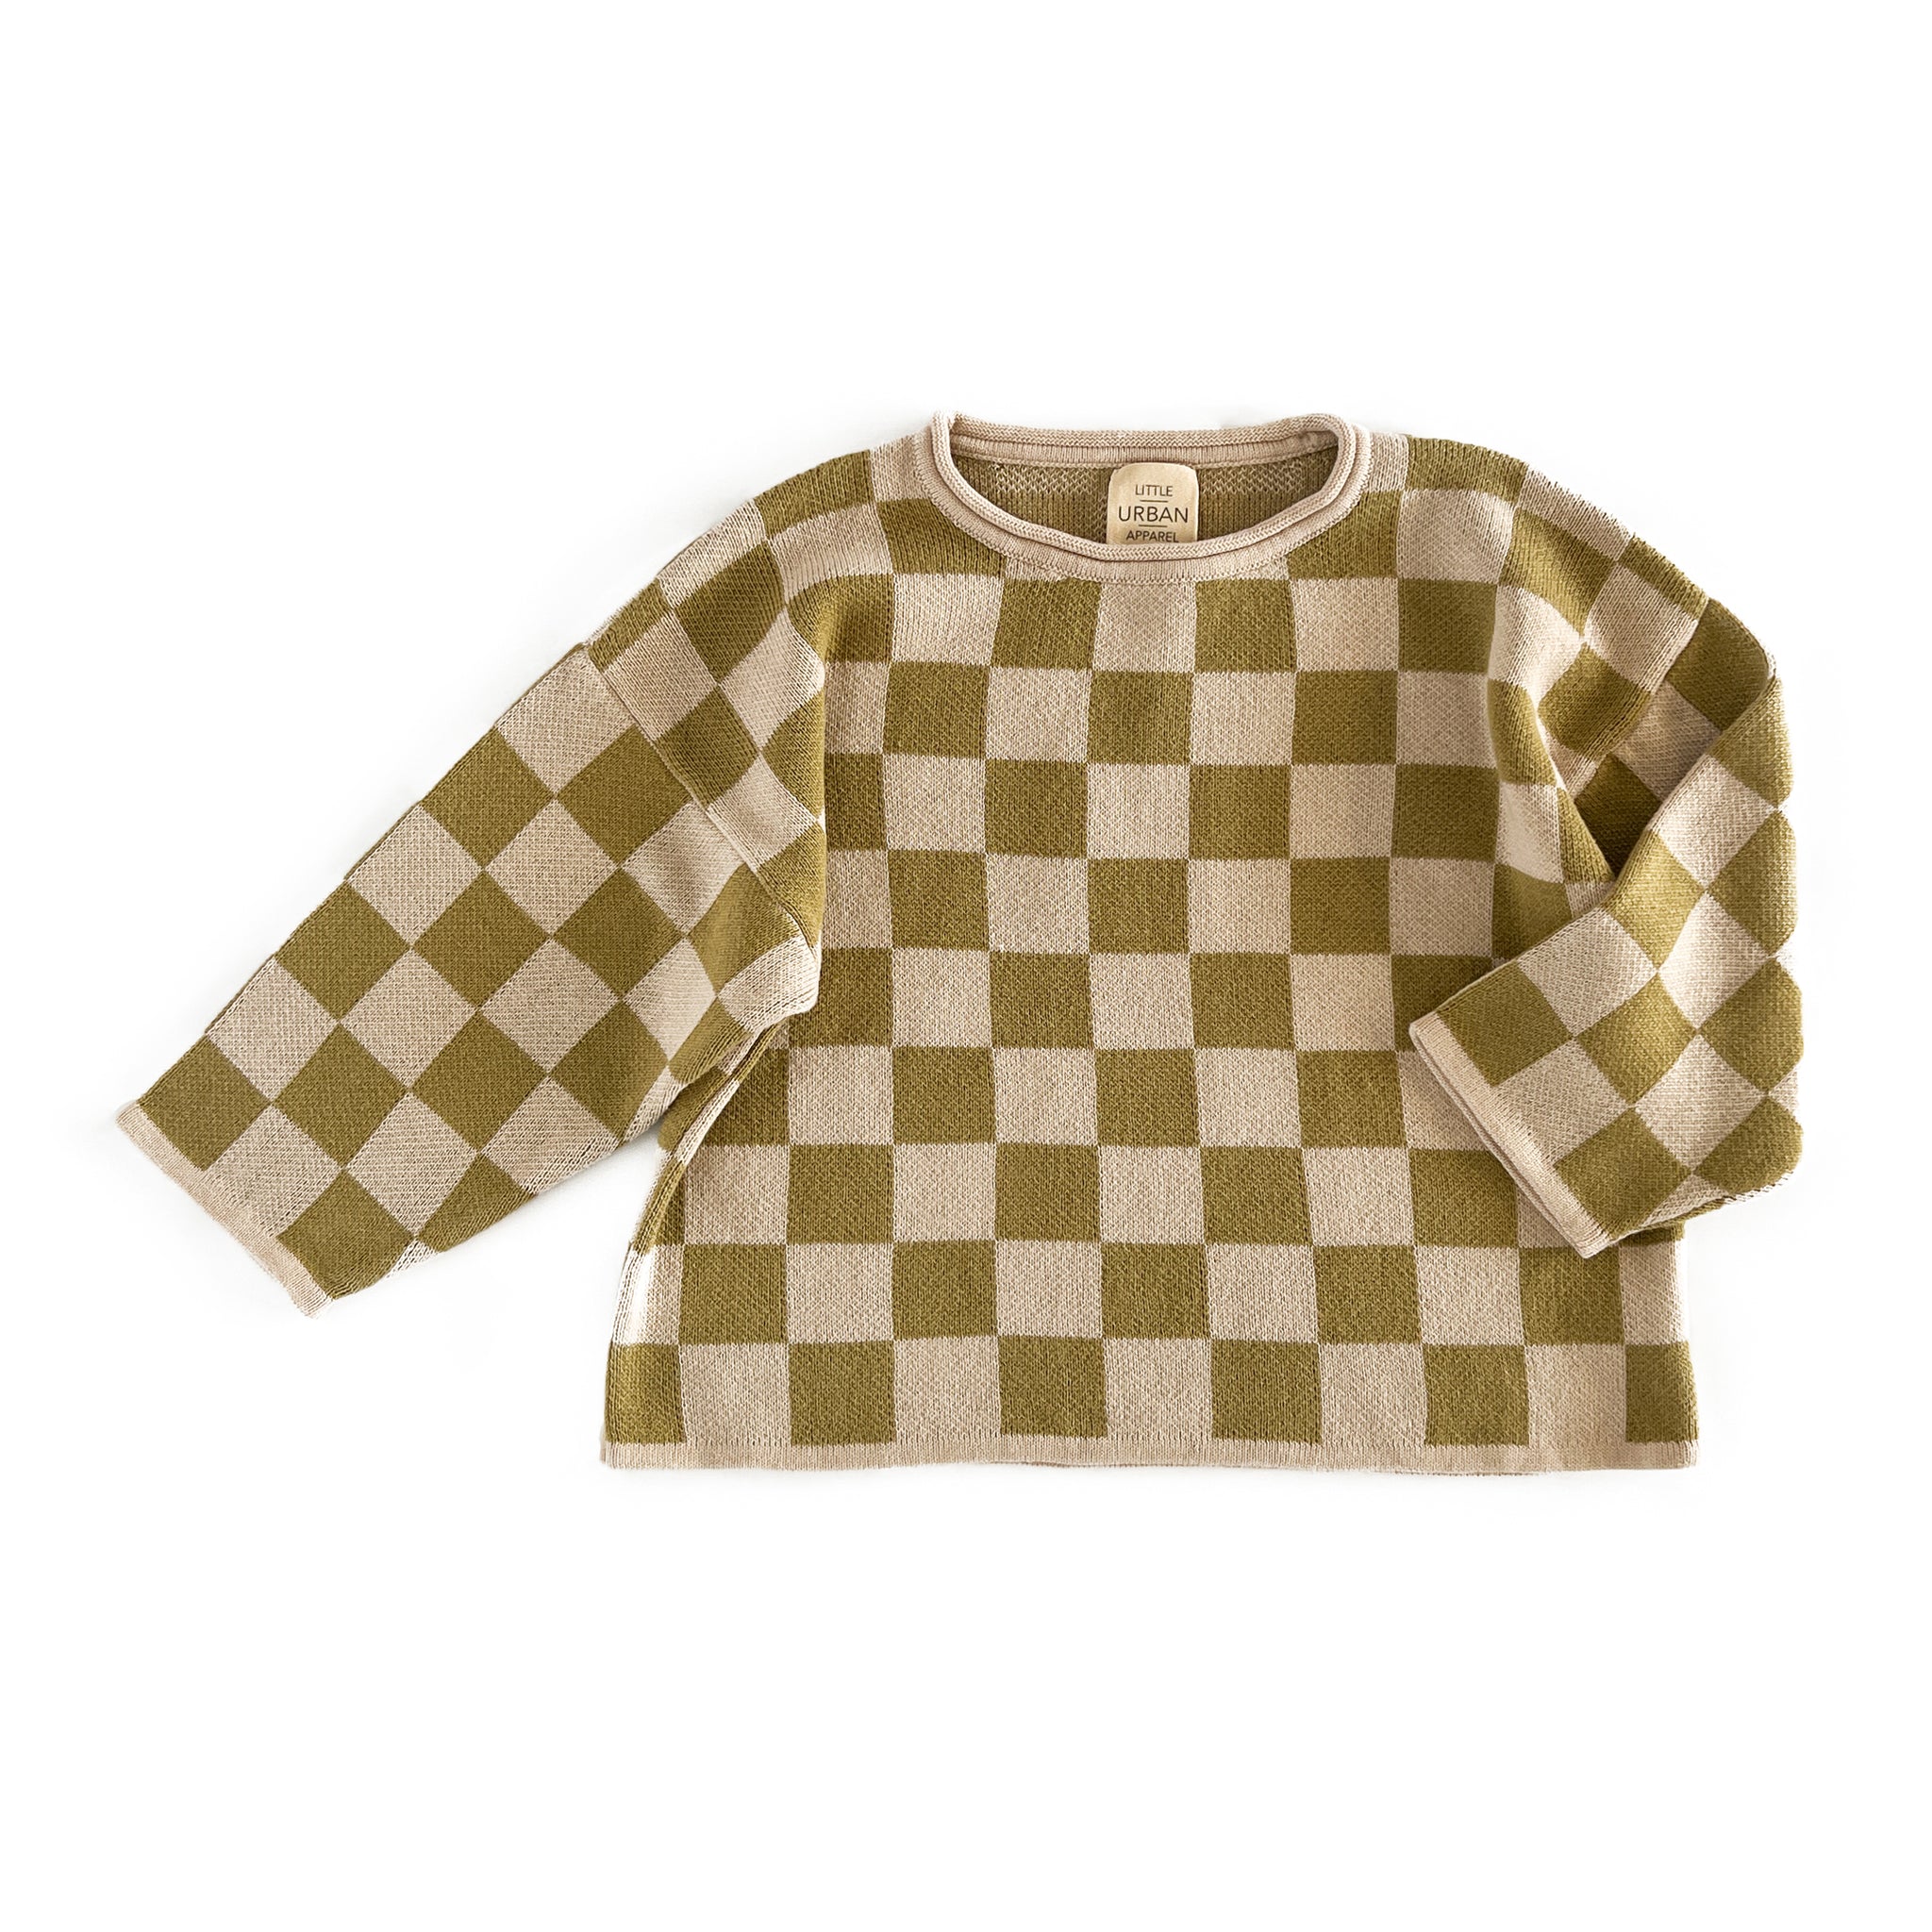 Olive Checkered Knit - Little Urban Apparel